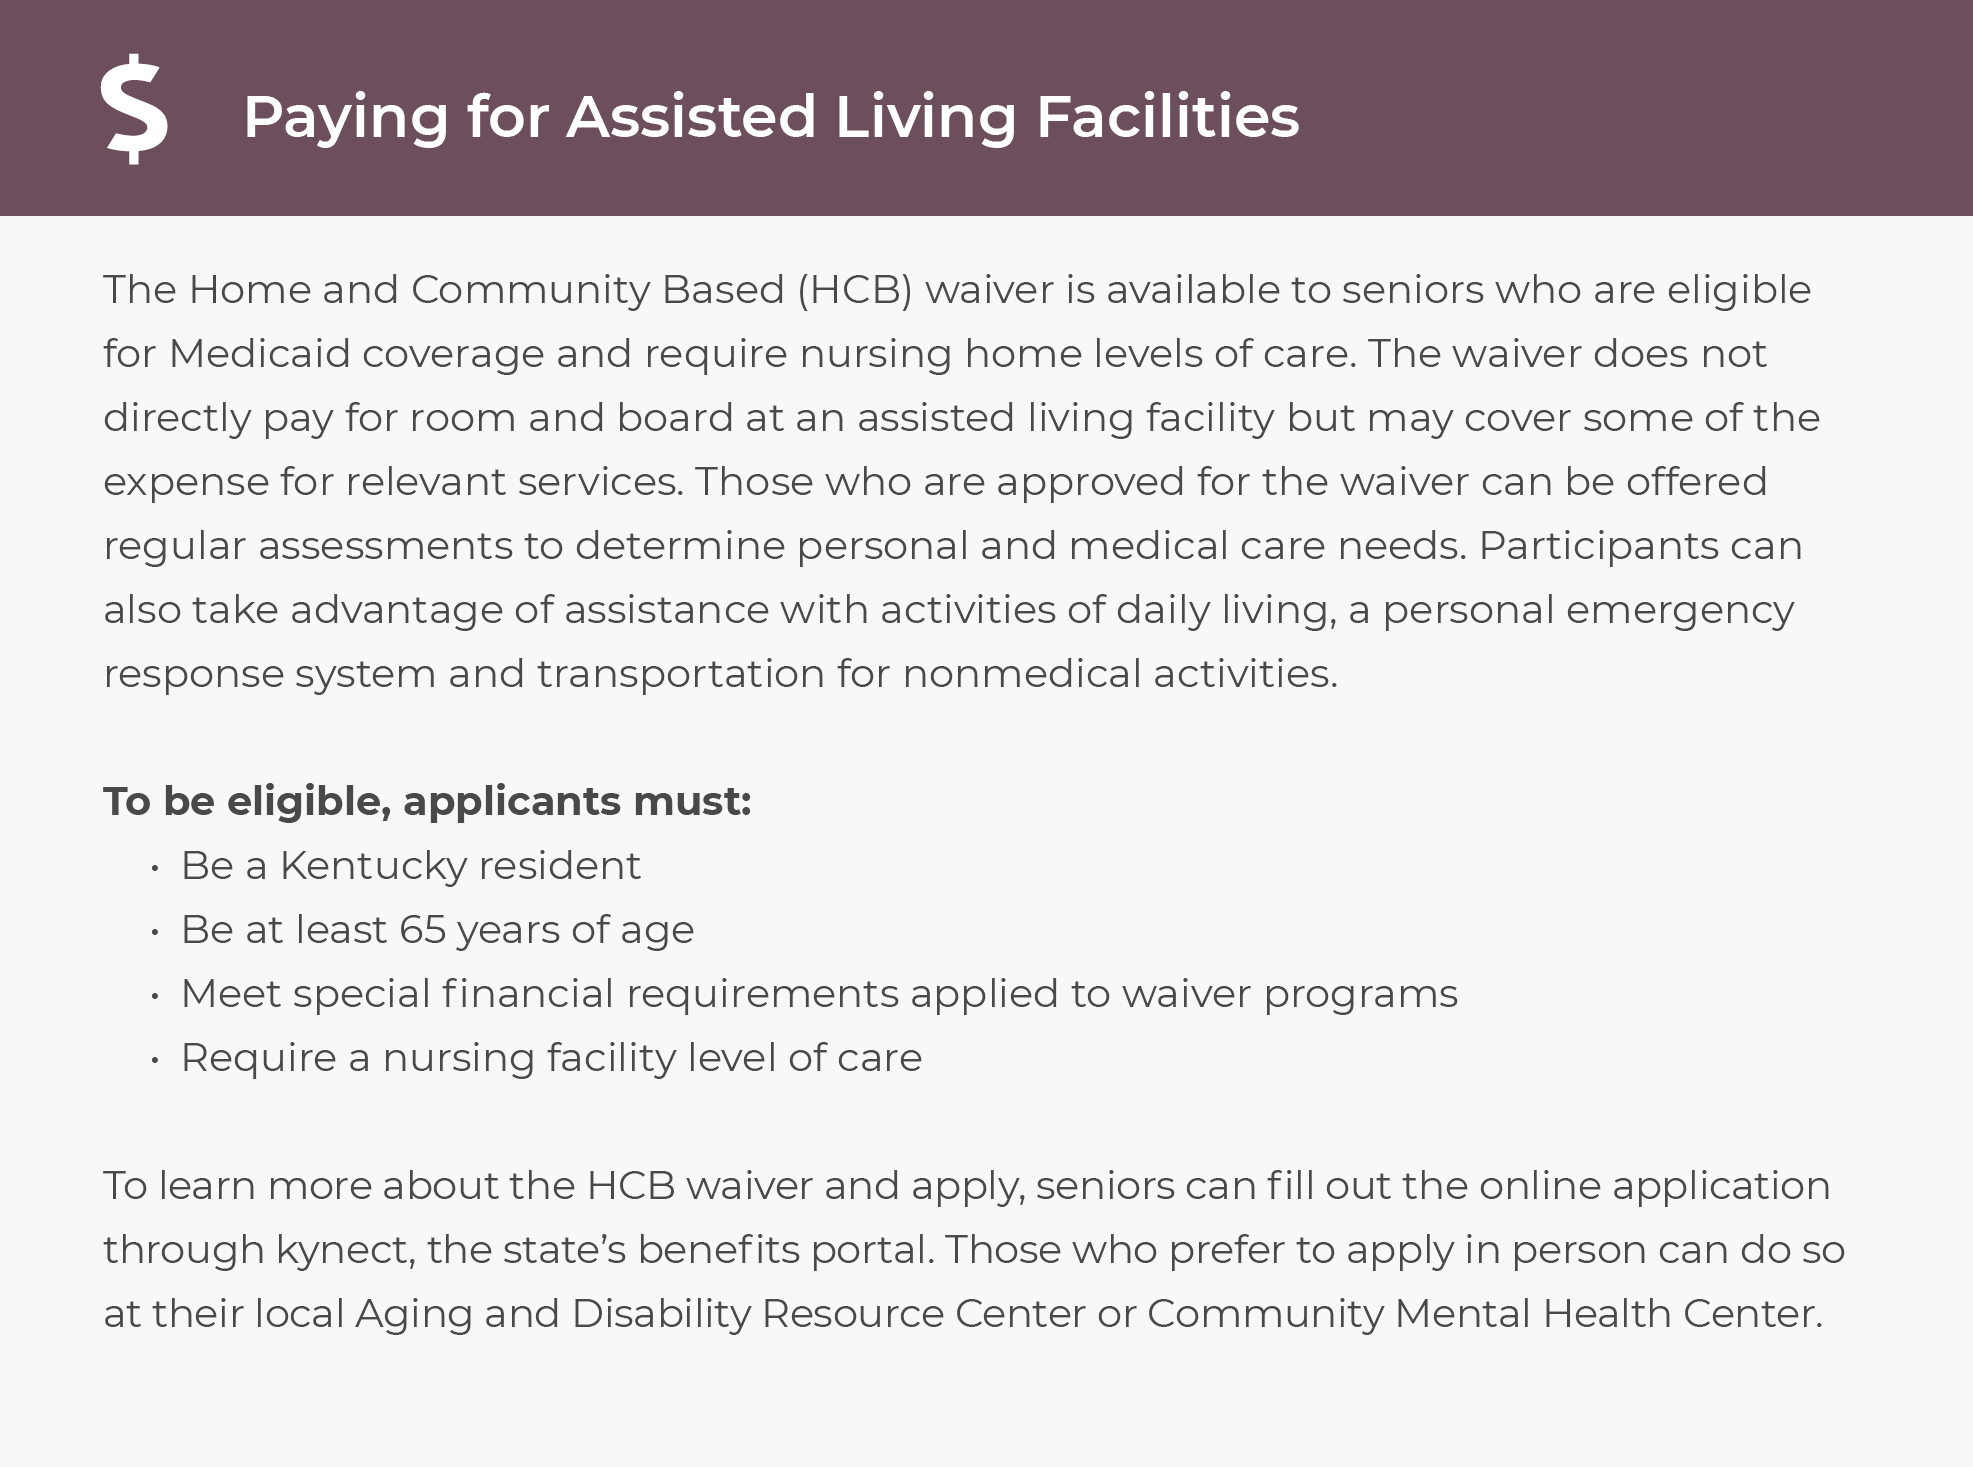 More ways to pay for assisted living in Kentucky